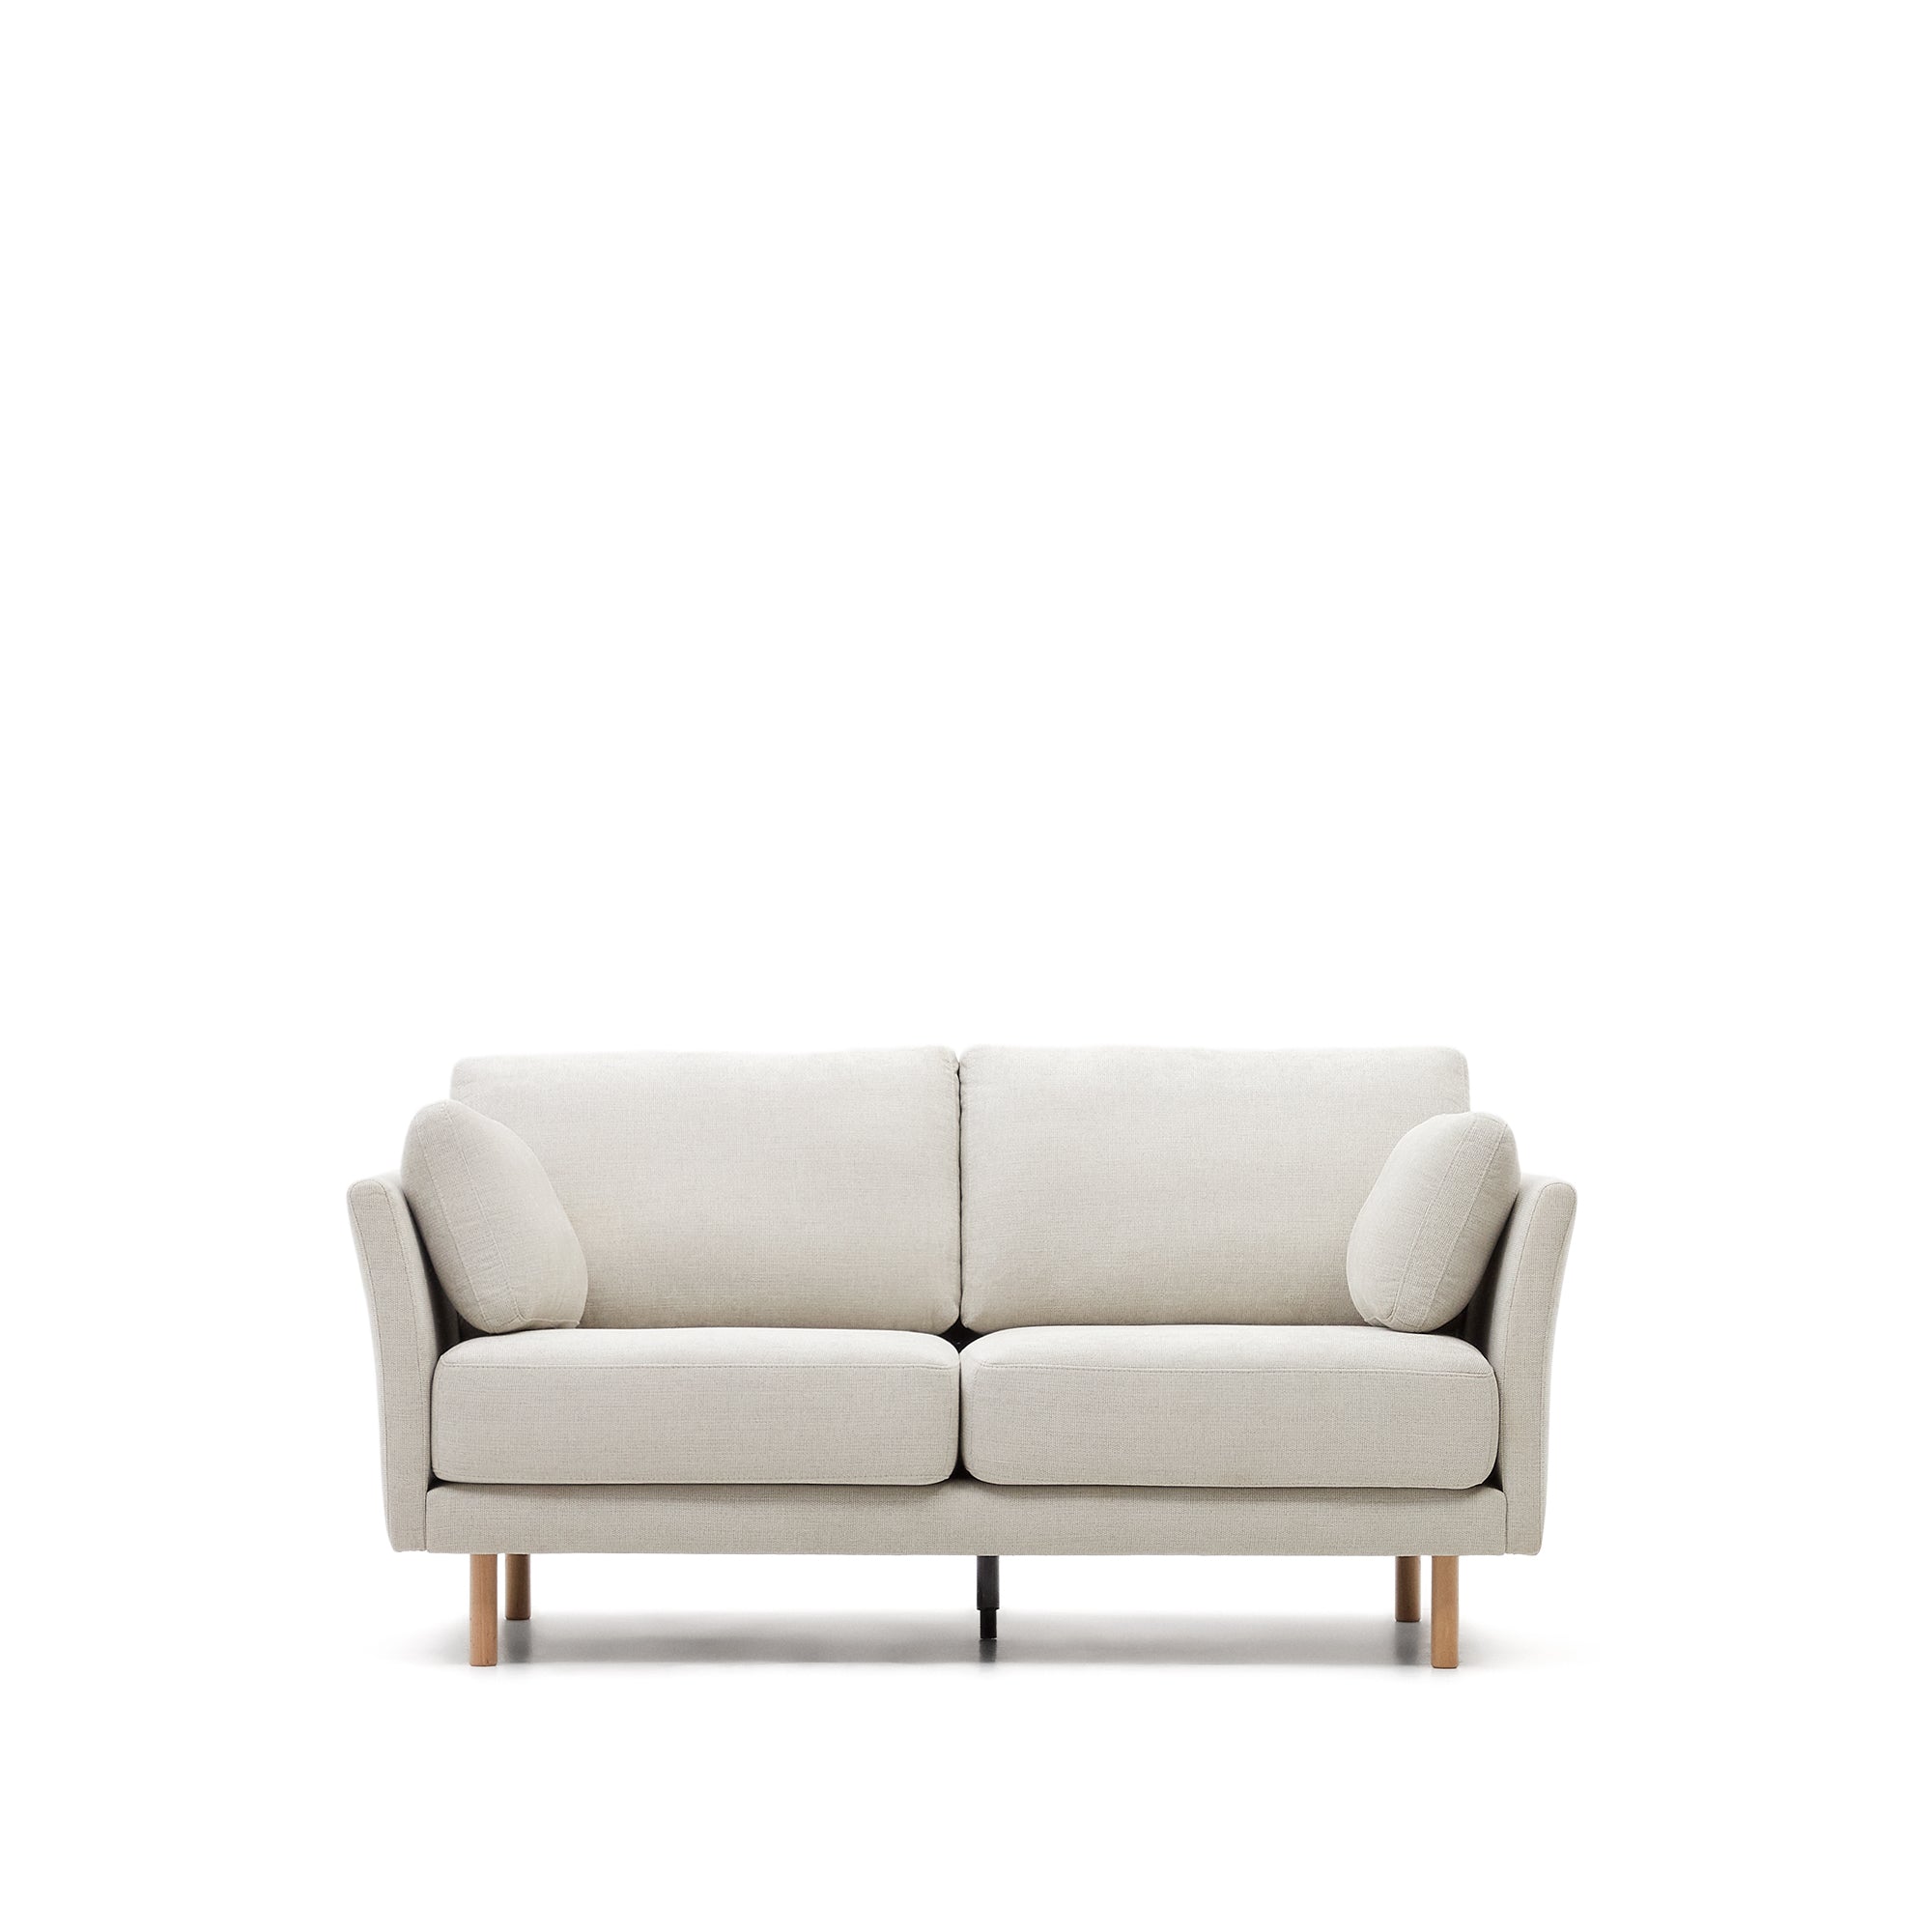 Gilma 2 seater sofa in chenille pearl with natural wood finish legs, 170 cm